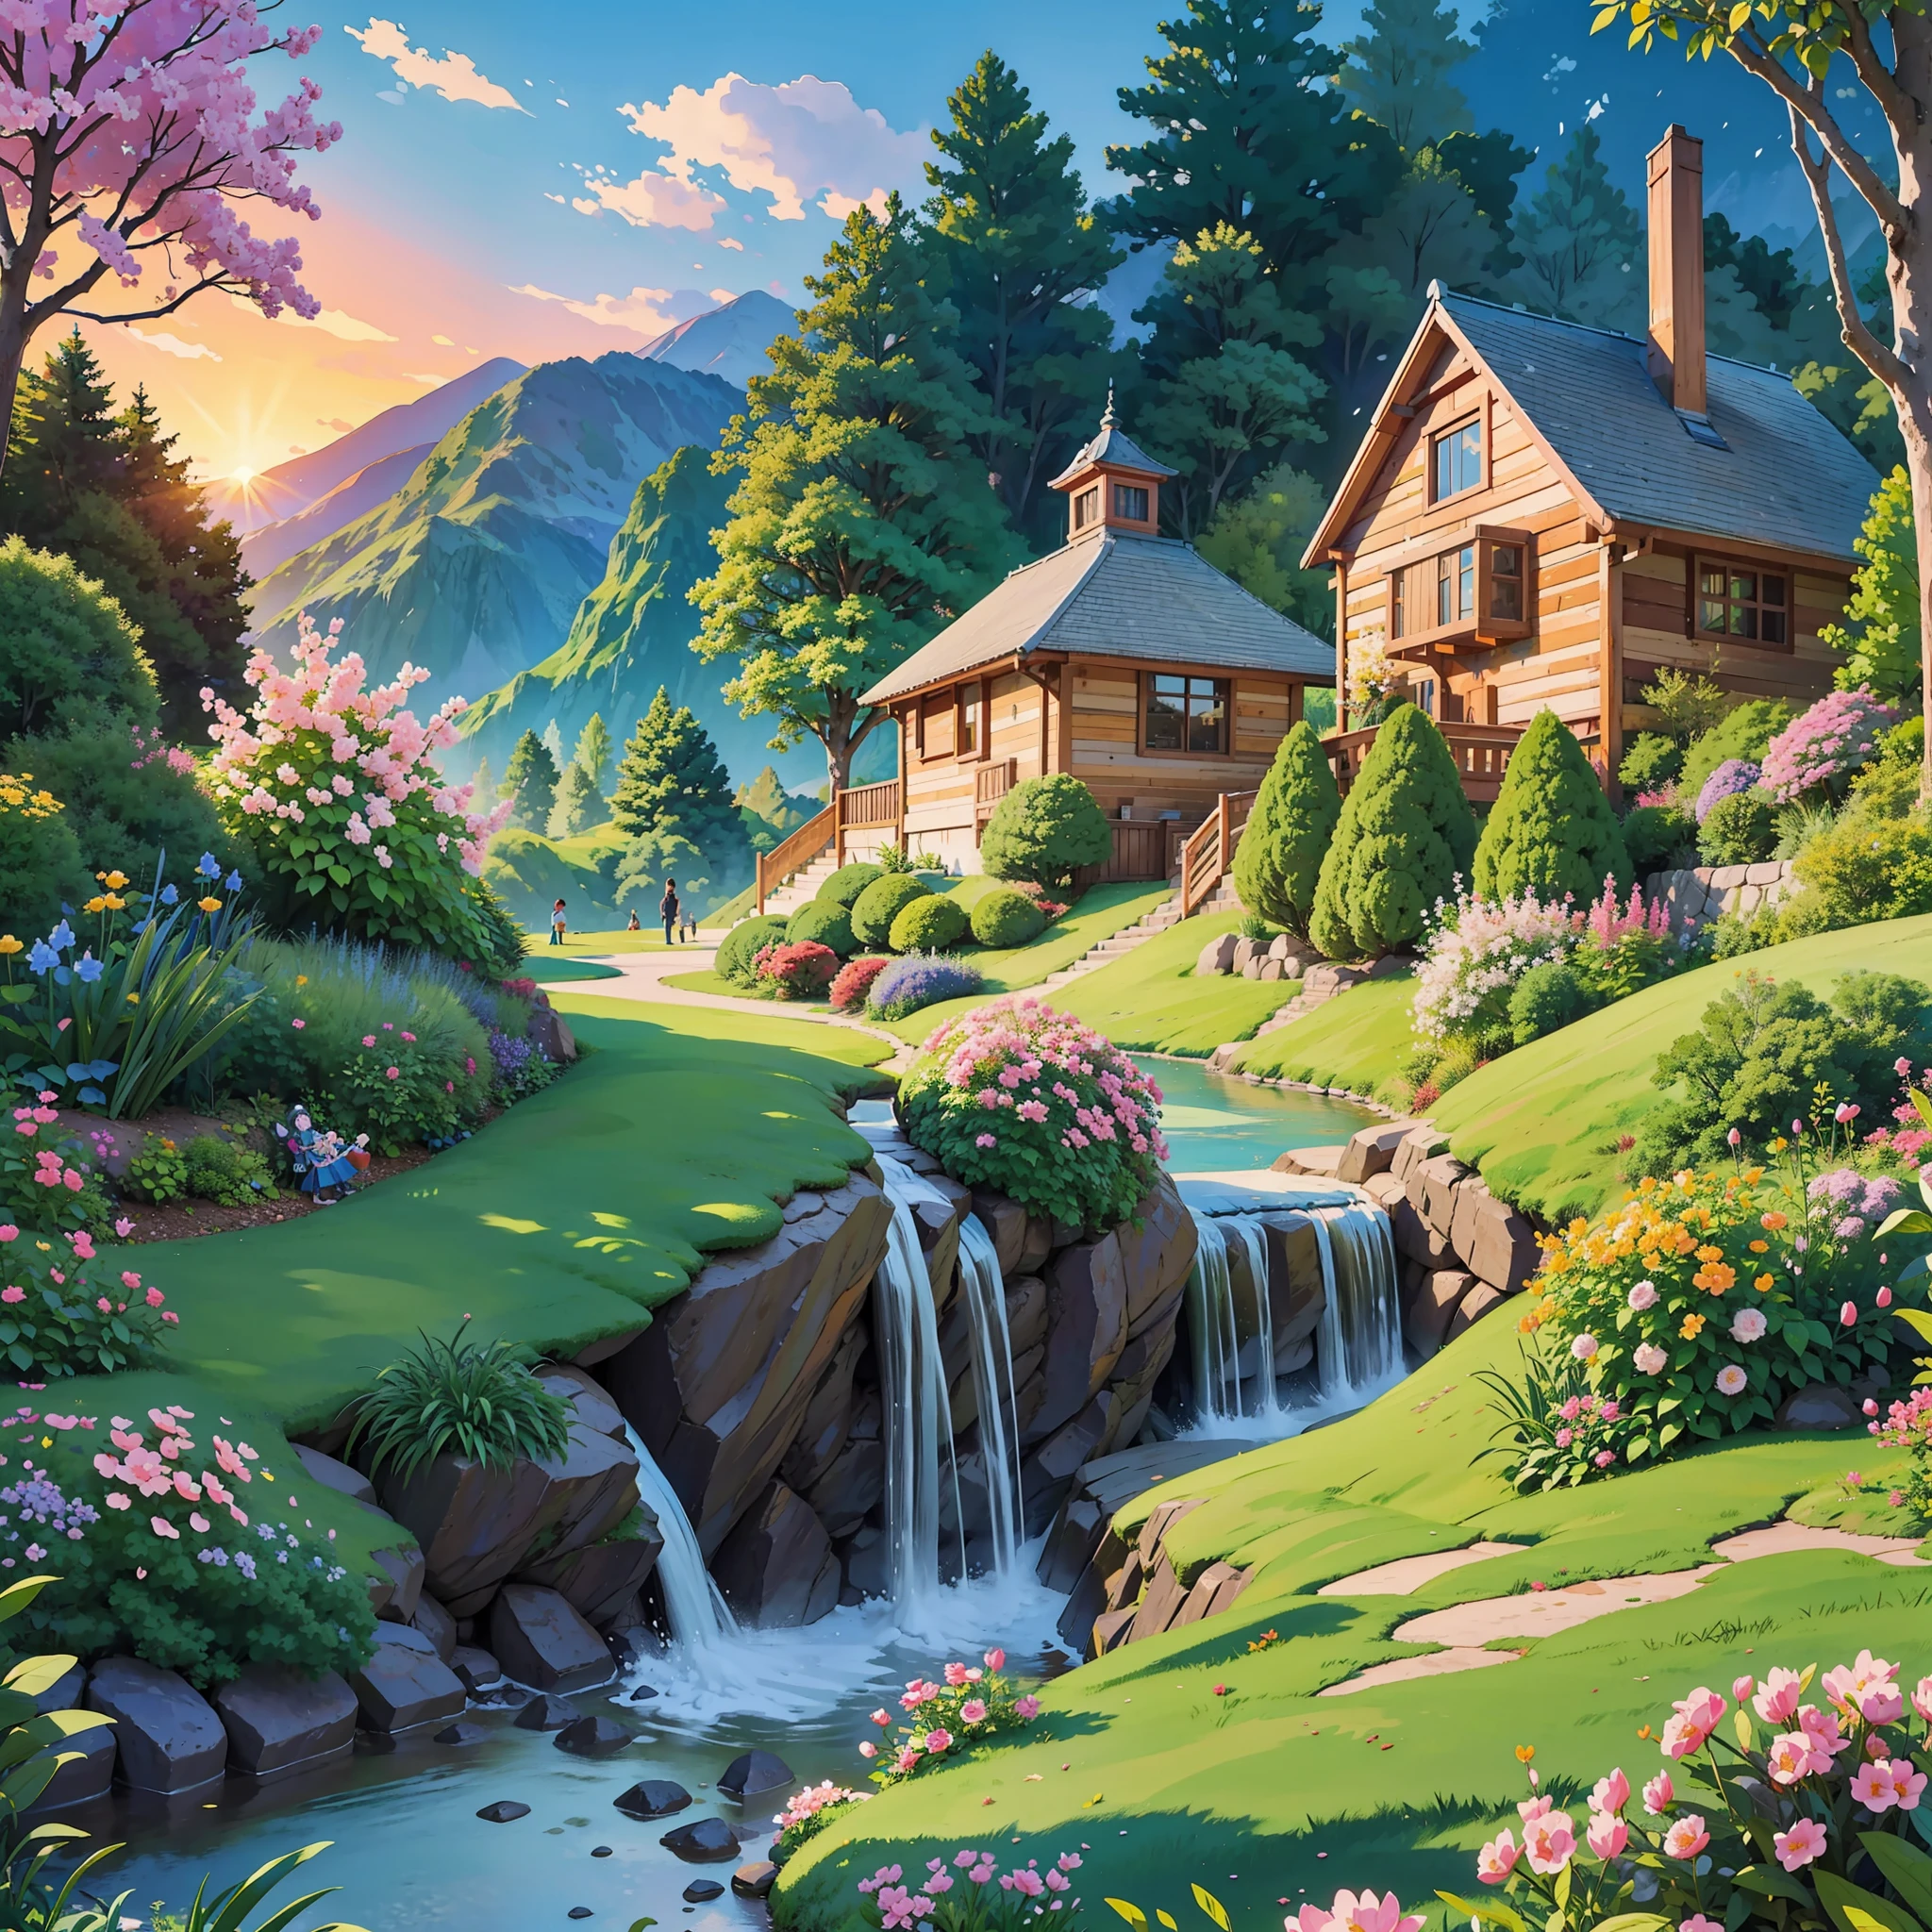 Illustration of mountain dwellings, waterfalls in the backyard, a beautiful brick trail lead to a beautiful flowering garden, children play at sunny dusk in a beautiful grassy garden, amazing snows, birds draw the skies